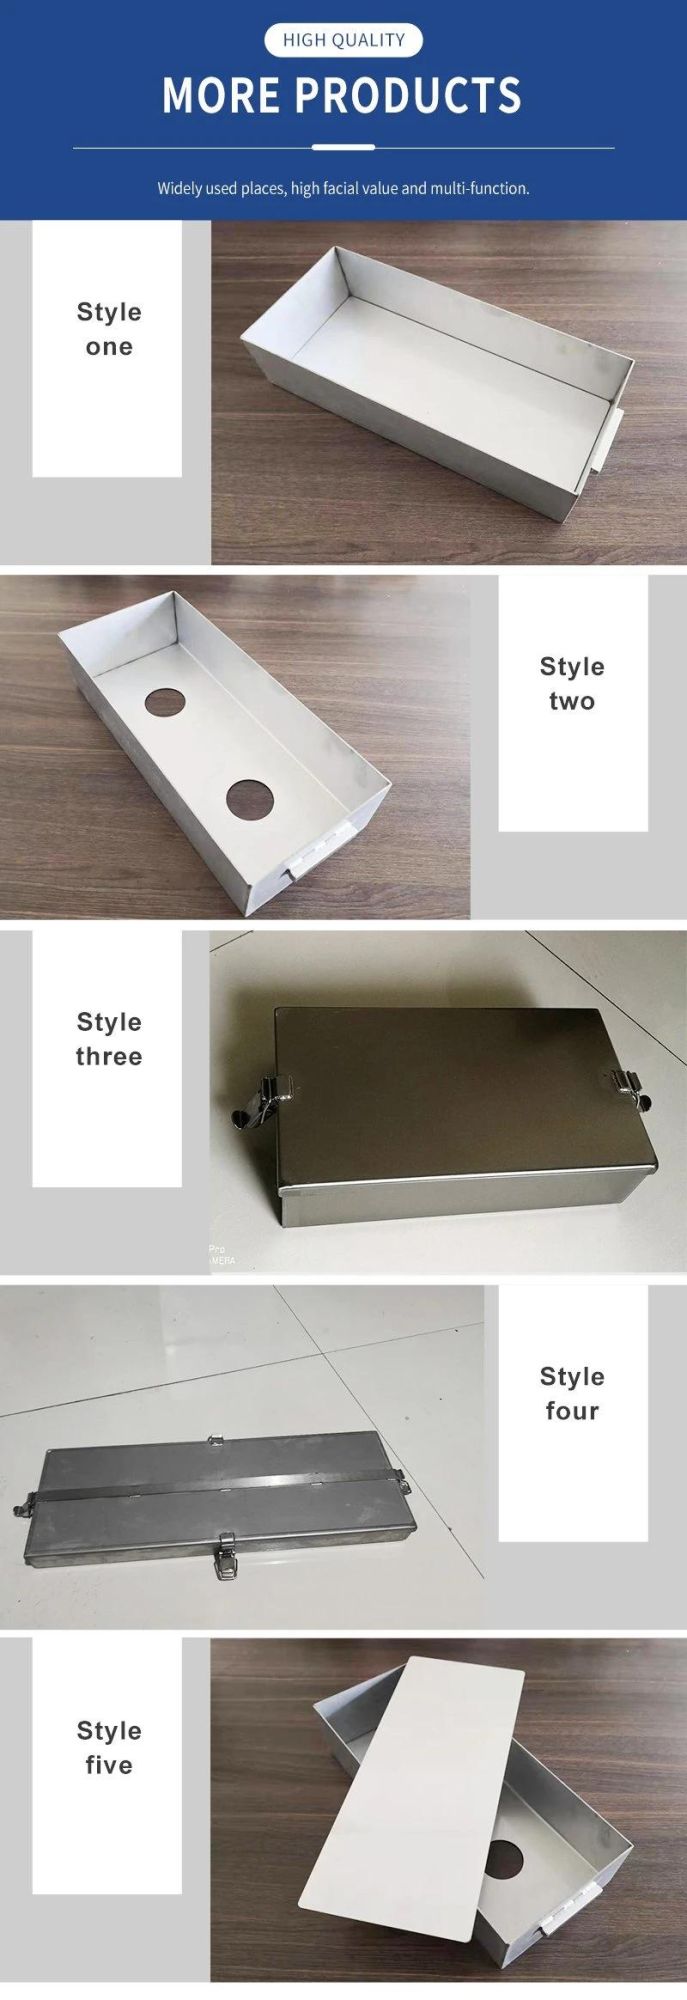 Stainless Steel Storage Box Mold